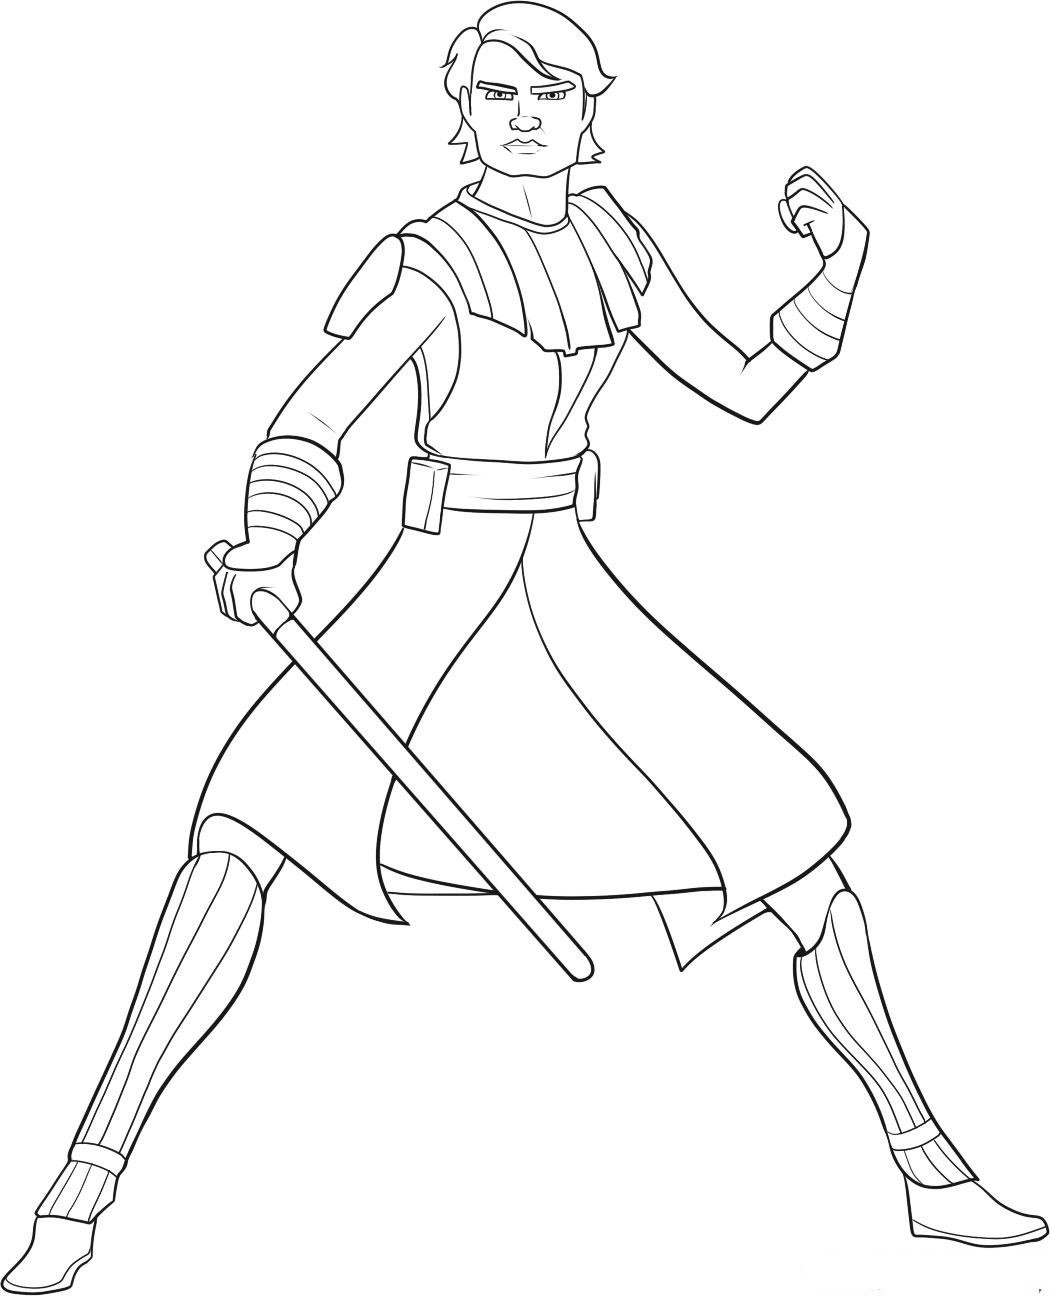 Coloring Pages For Kids Star Wars
 star wars darth vader yoda coloring pages for kids storm